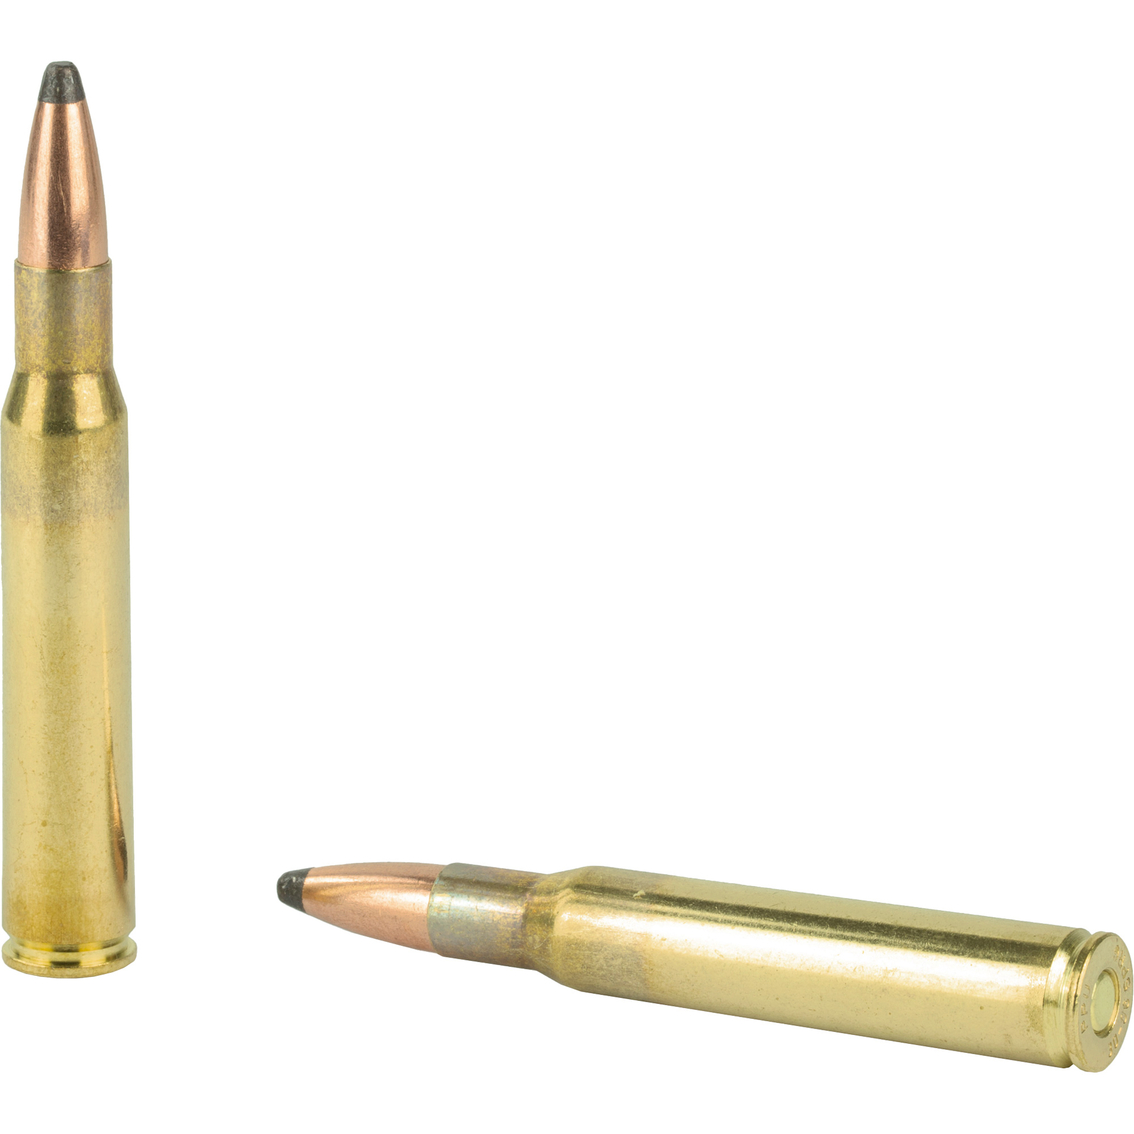 Prvi Partizan 30-06 Springfield 150 Gr. Soft Point 20 Rds - Image 2 of 4